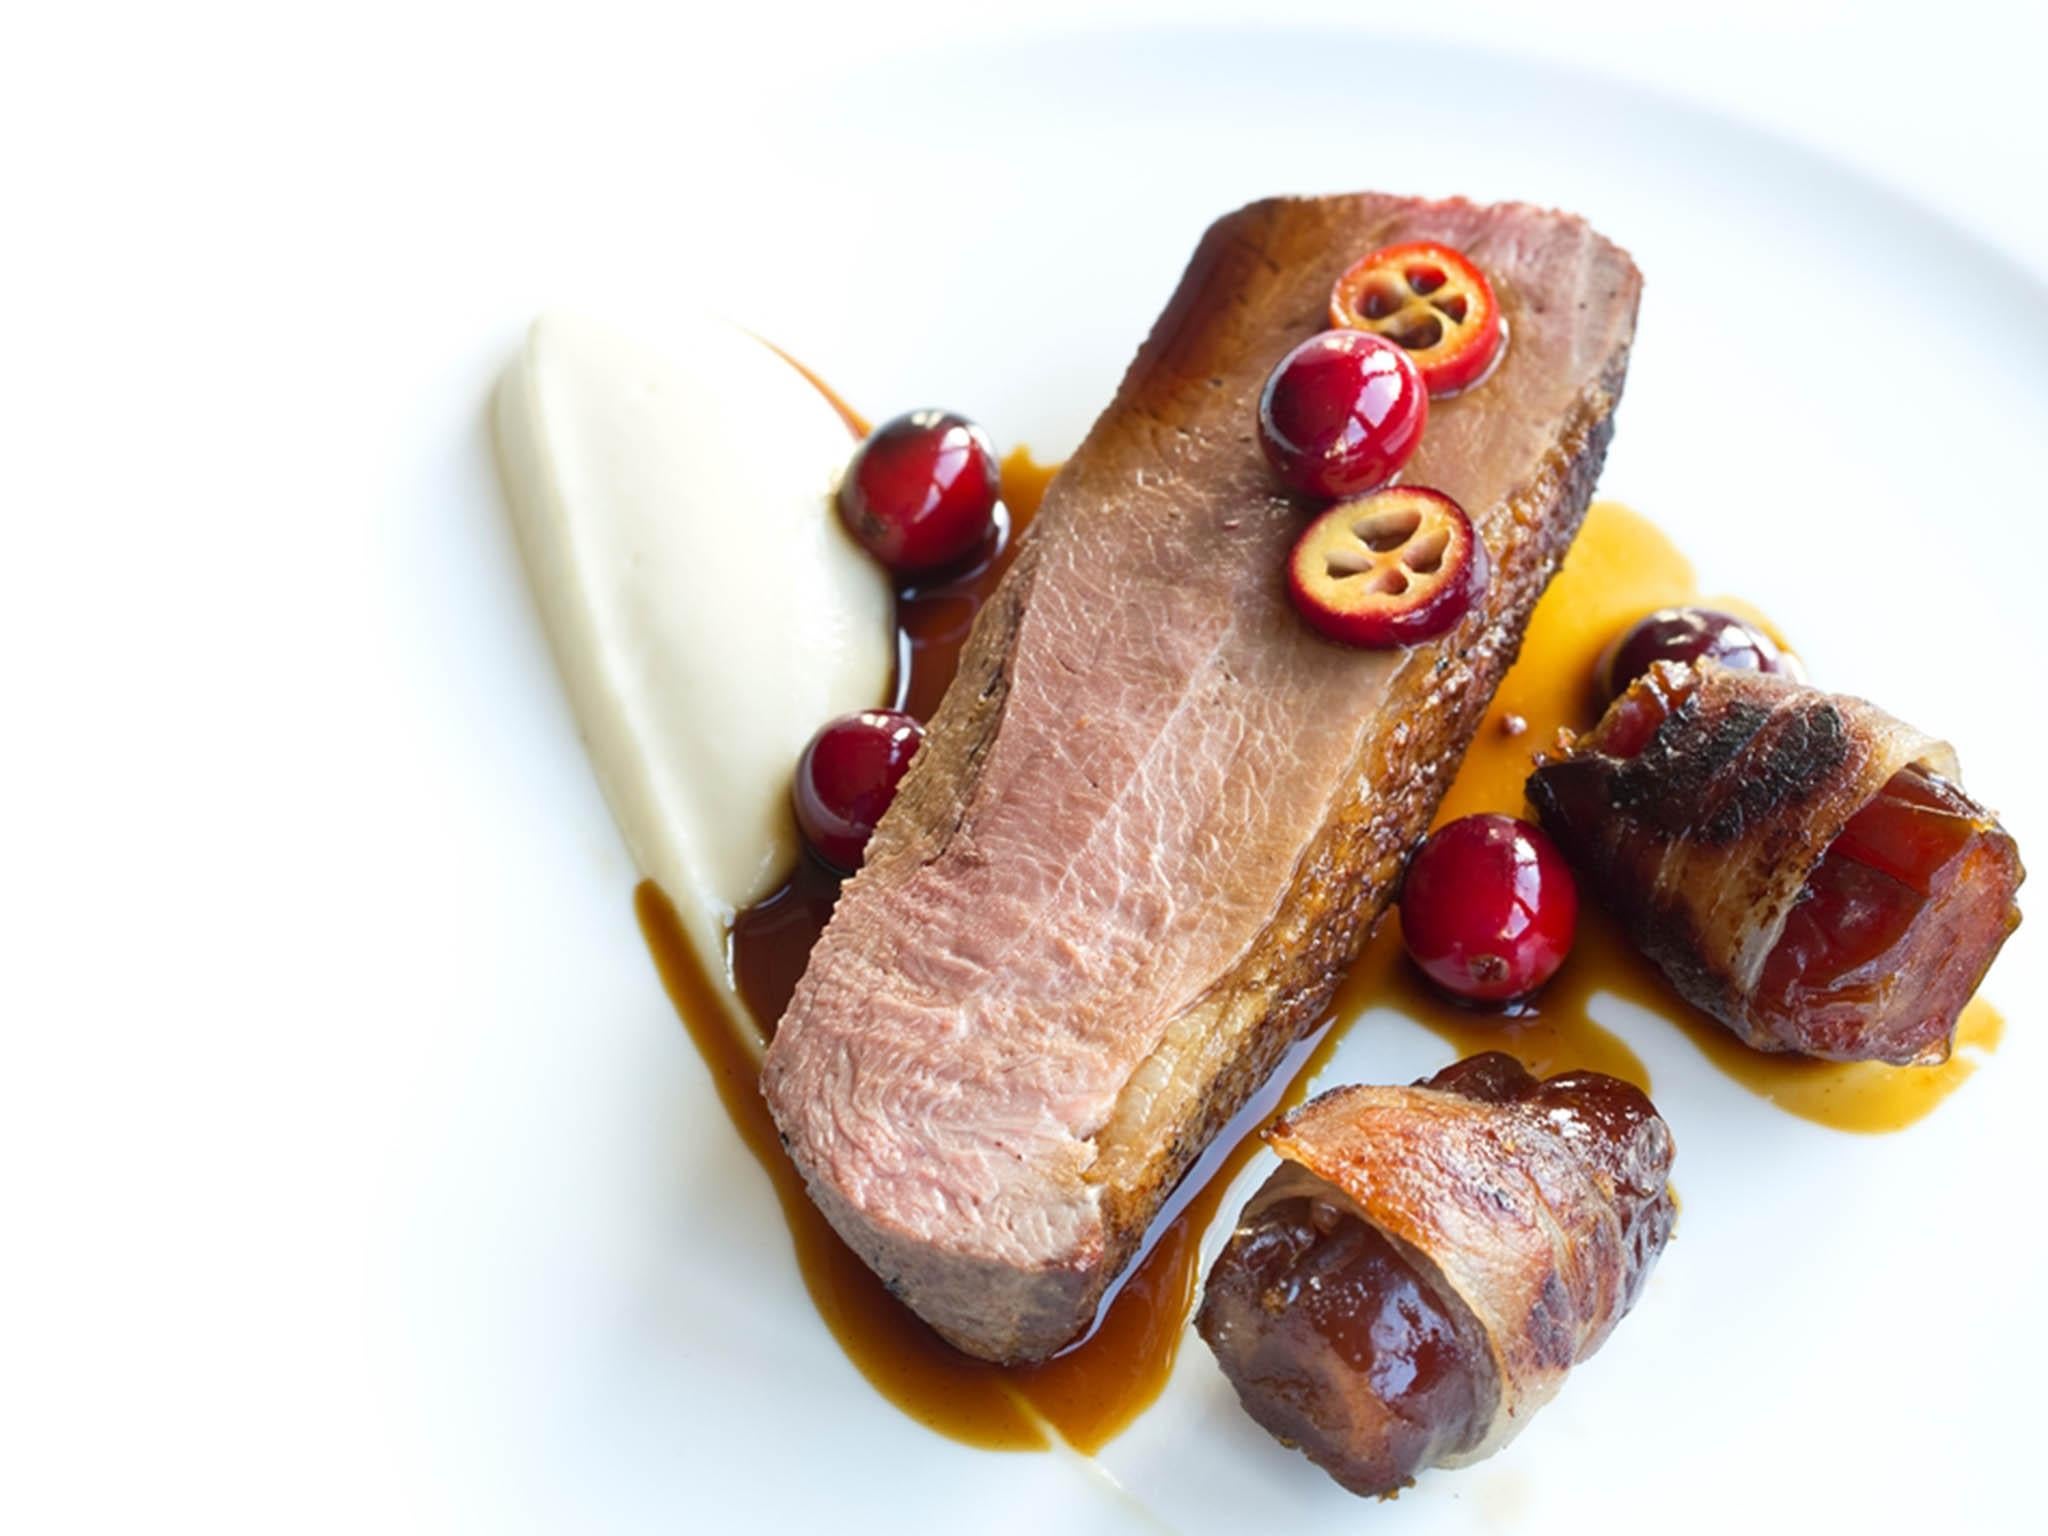 Bacon-wrapped dates flank the goose on a bed of celeriac purée